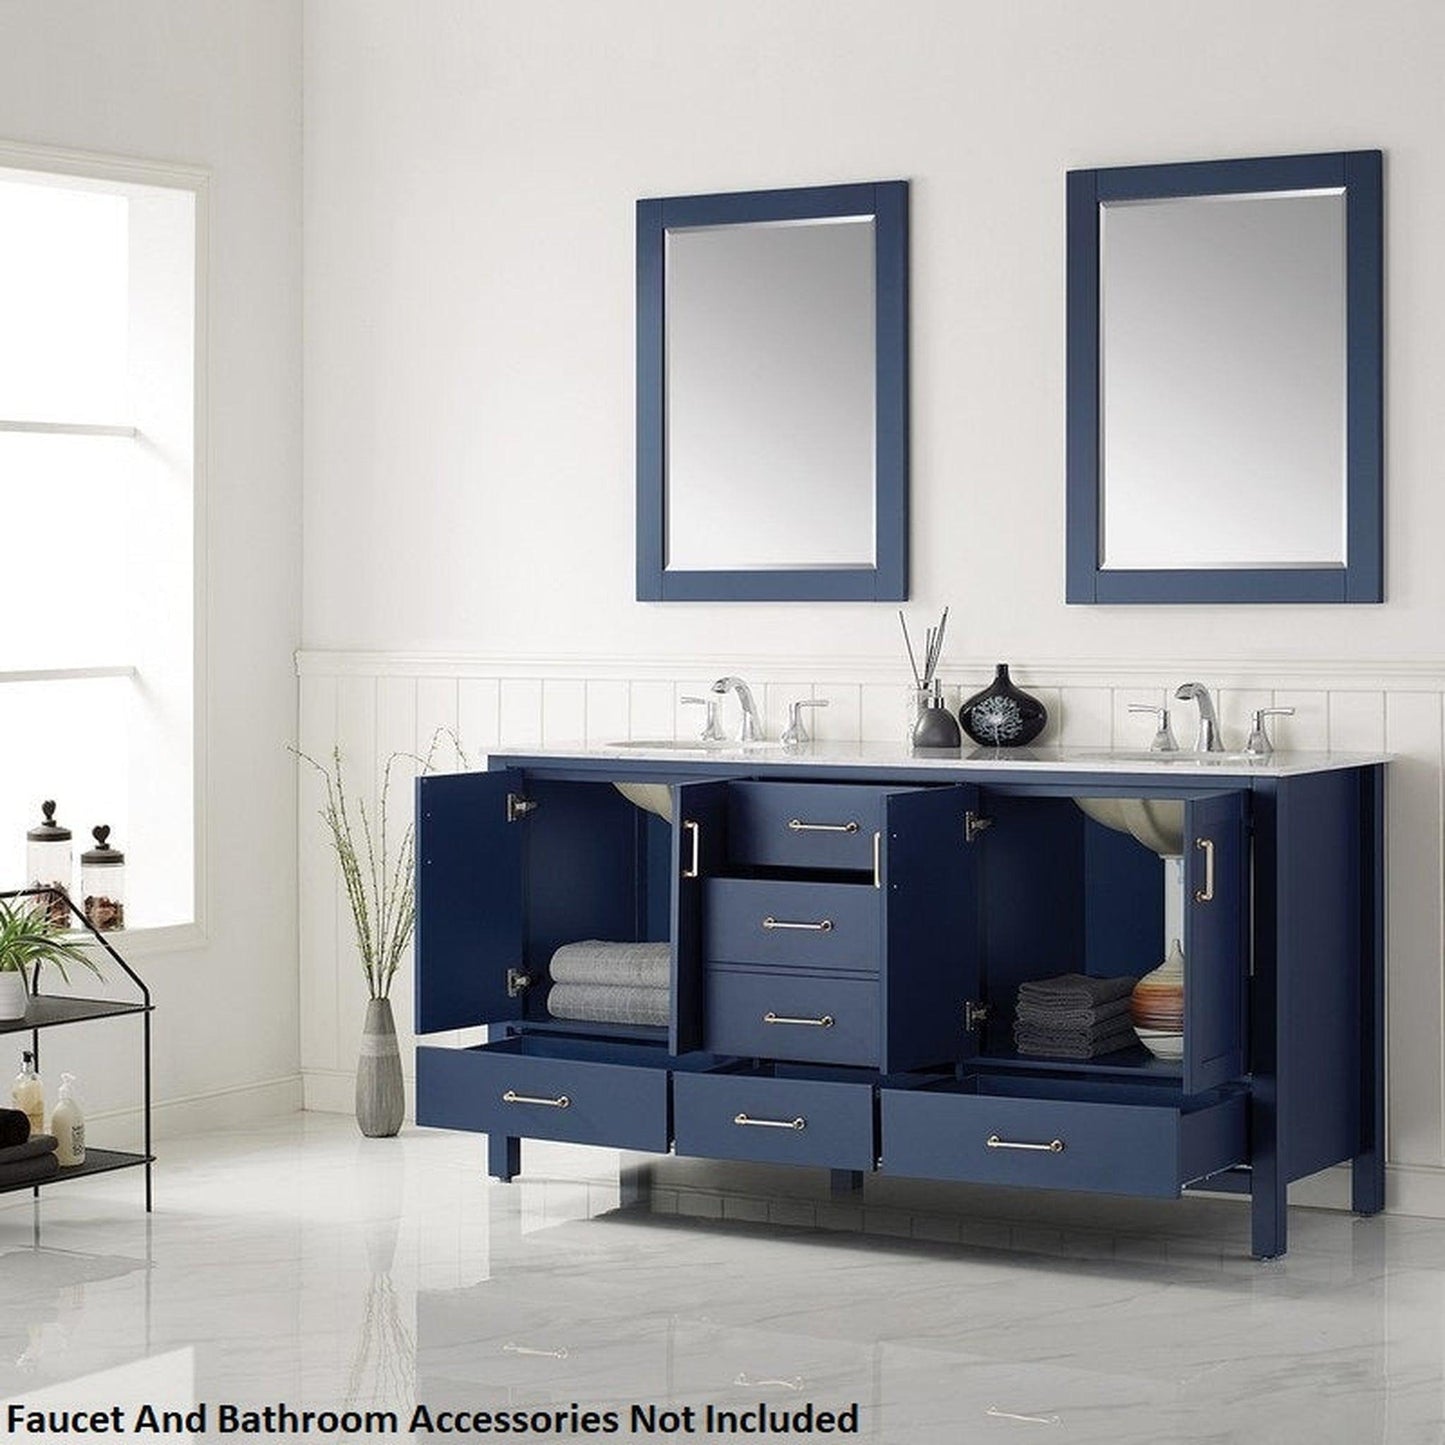 Vinnova Gela 72" Royal Blue Freestanding Double Vanity Set In White Carrara Marble Top With Undermount Ceramic Sink and Mirror